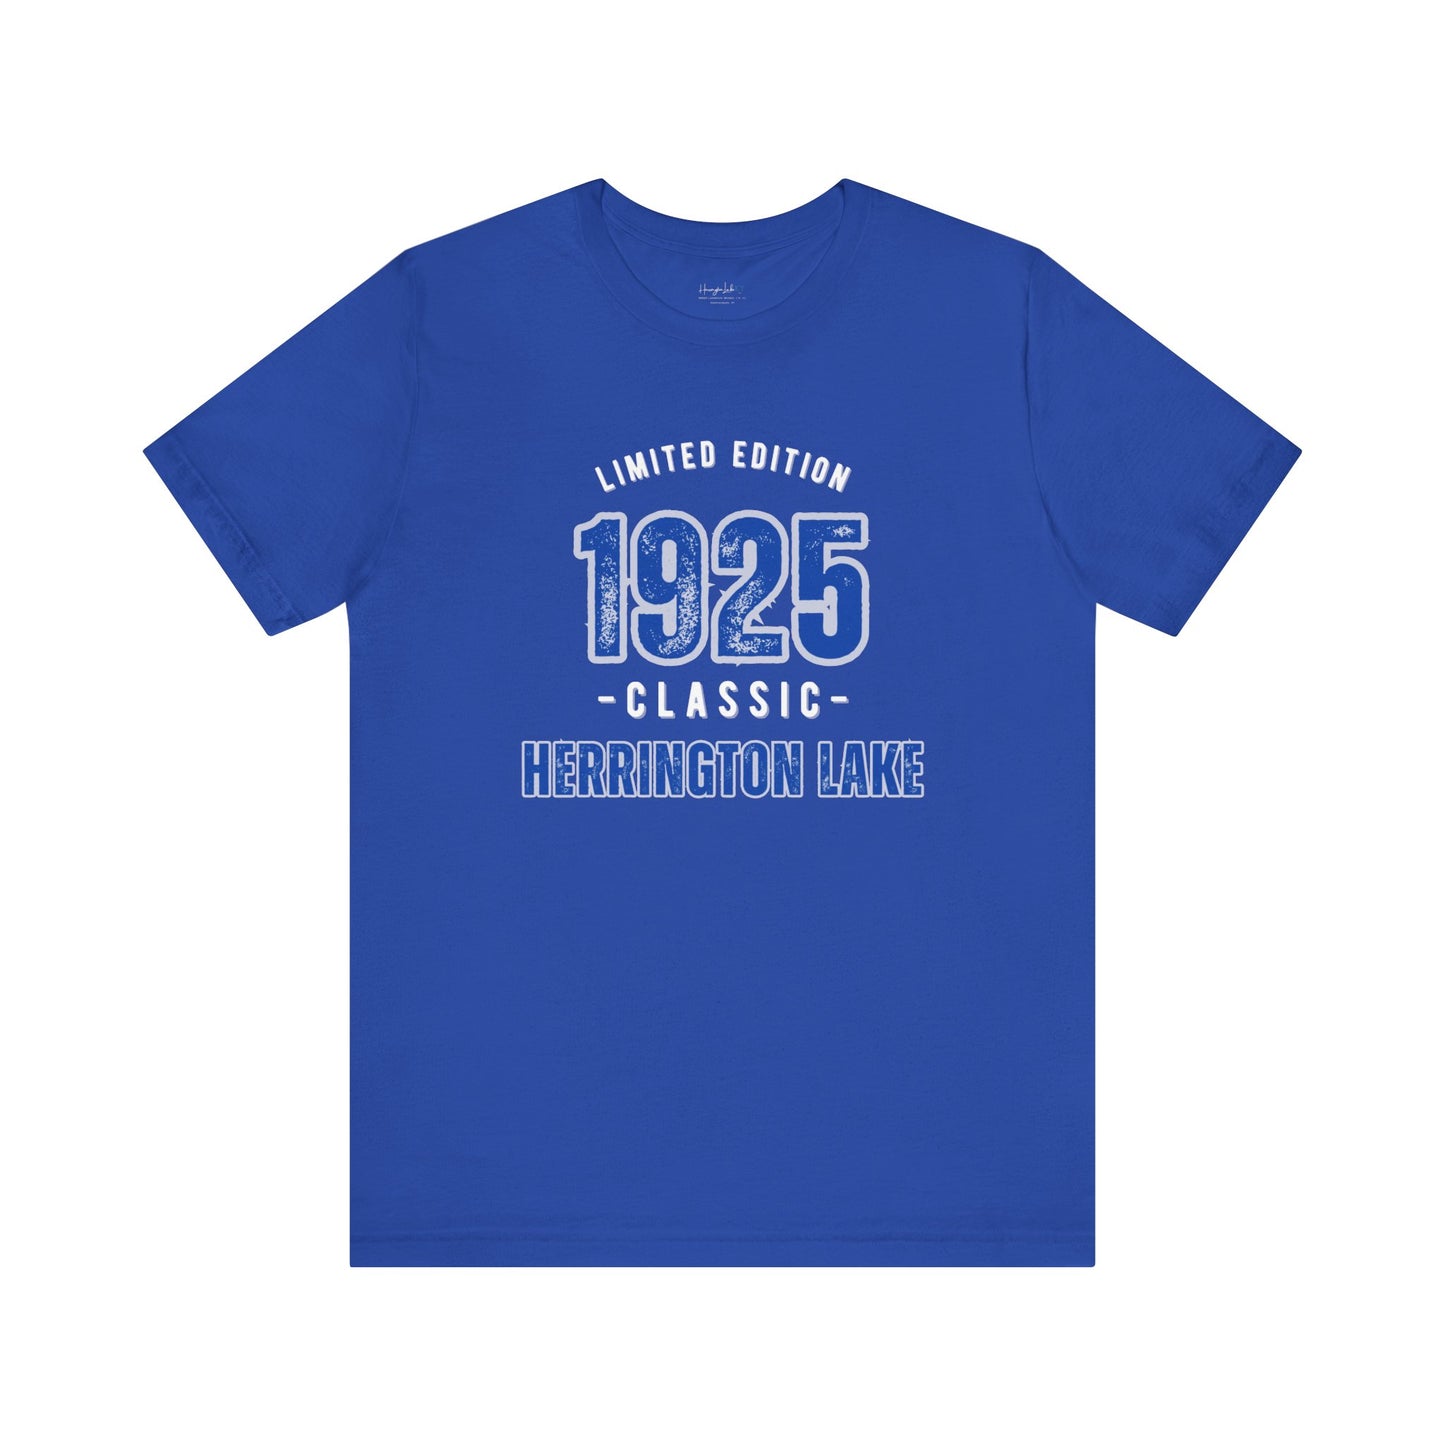 1925 Collection Limited Edition Jersey Knit Cotton Tee (Blue Highlight)